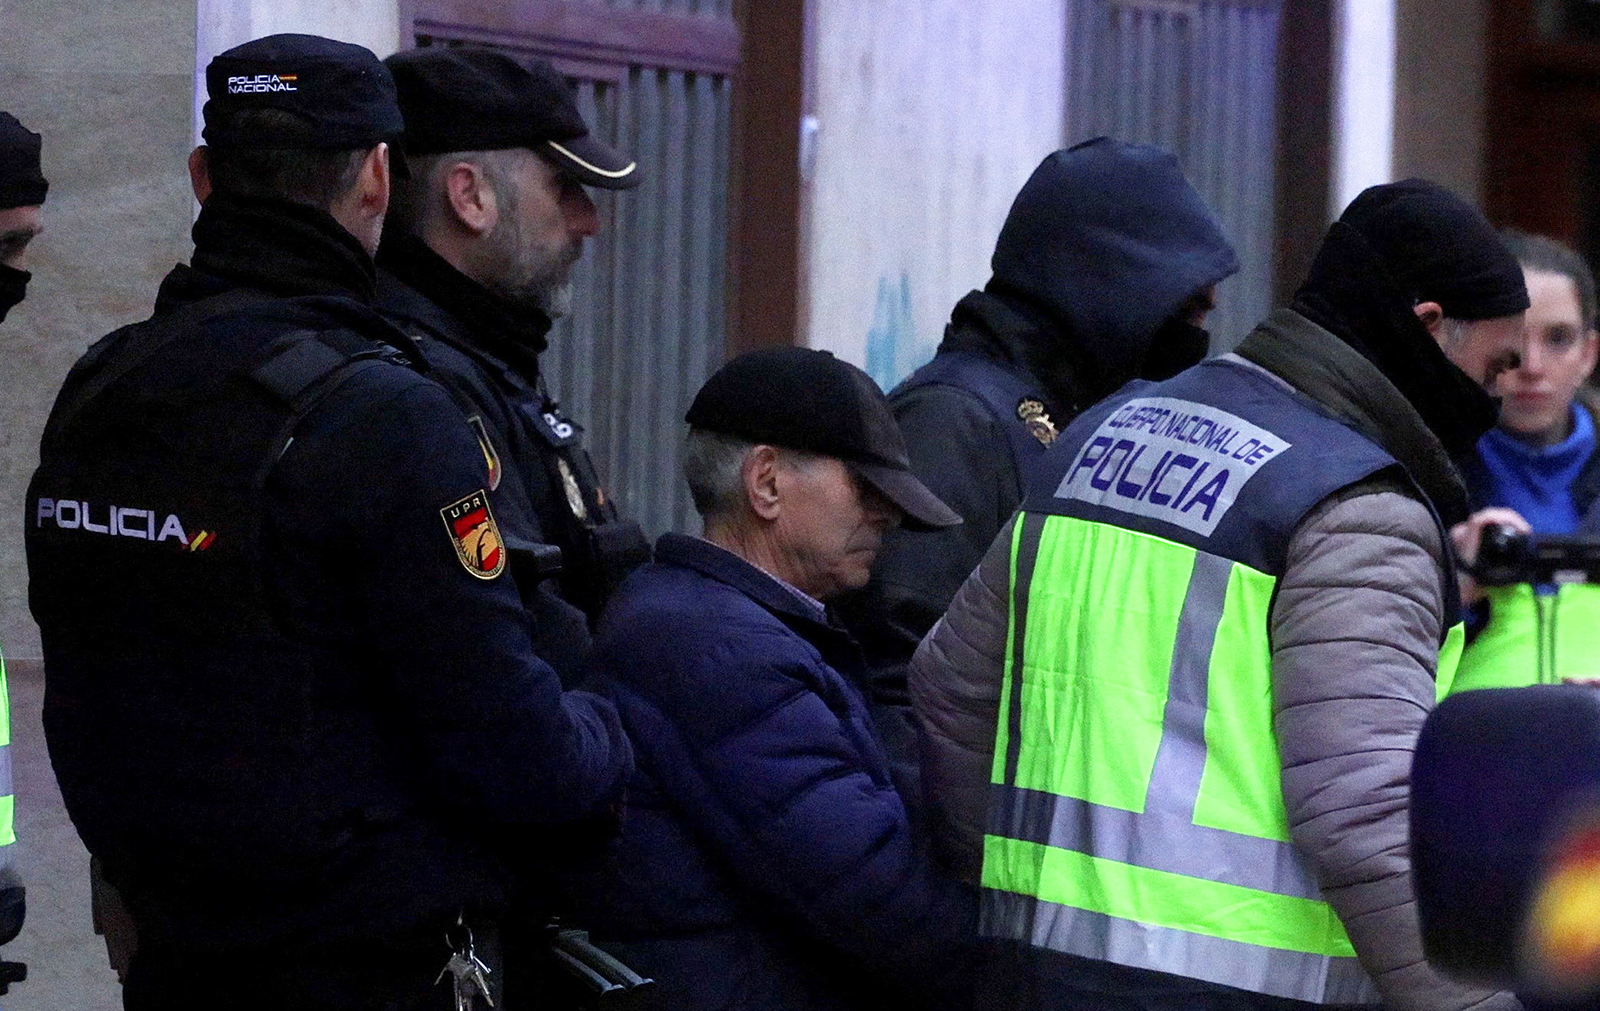 Spanish national police officers lead away a 74-year-old man under arrest on suspicion of being the sender of letter-bombs in November and December to the Ukrainian and U.S. embassies and several institutions in Spain, in Miranda de Ebro, Spain, on January 25.